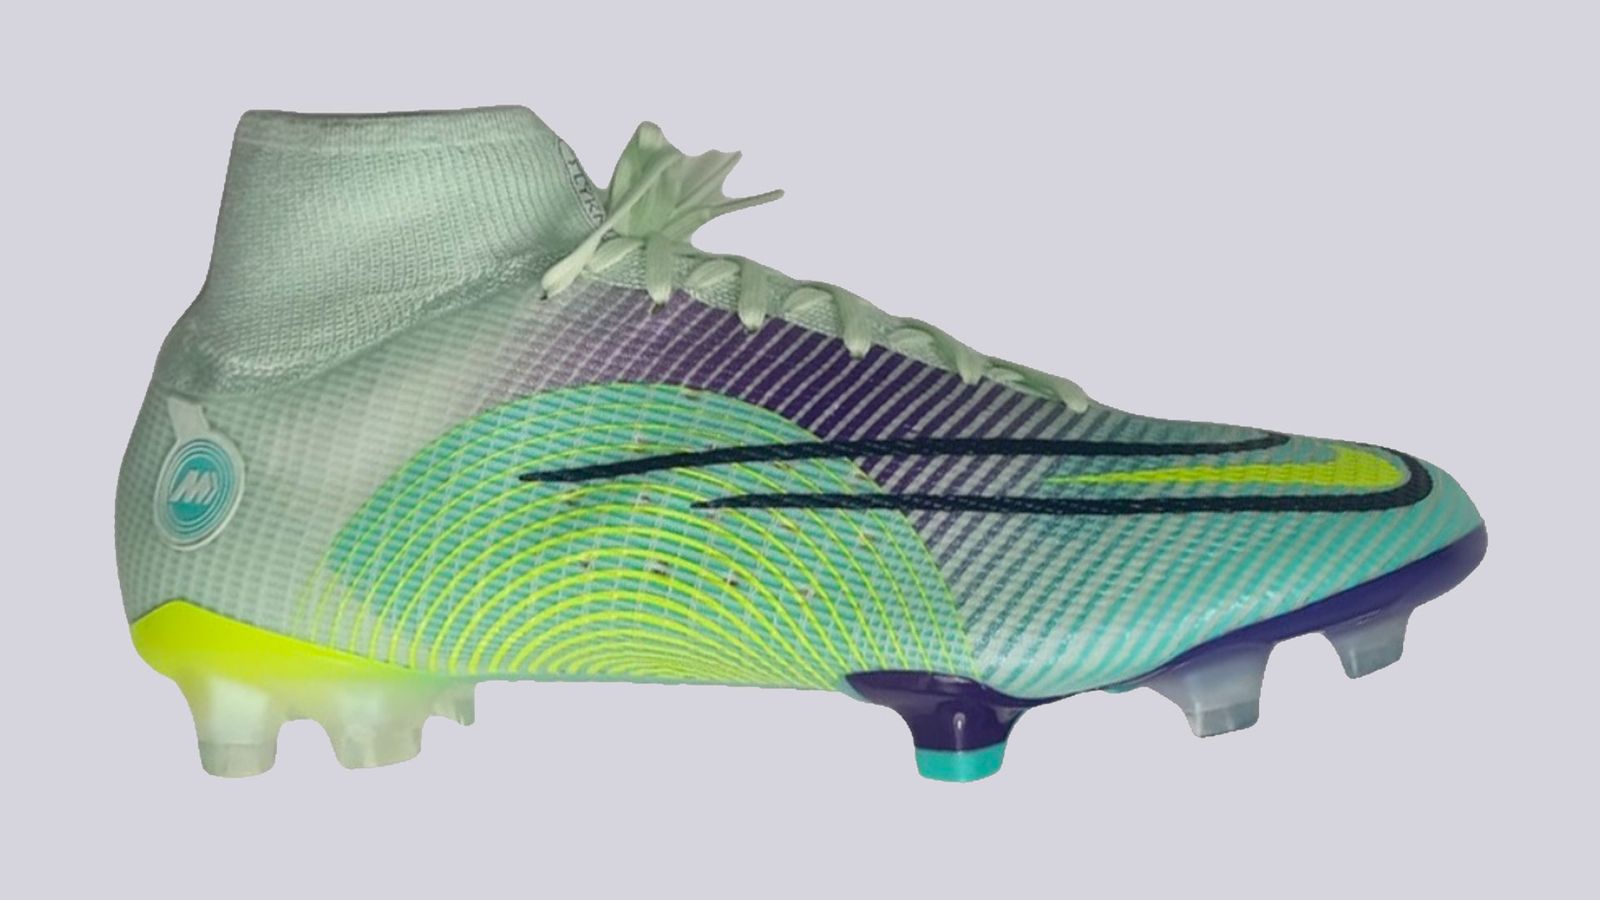 Nike Mercurial Dream Speed 5 product image of a single green, yellow, and purple football boot.